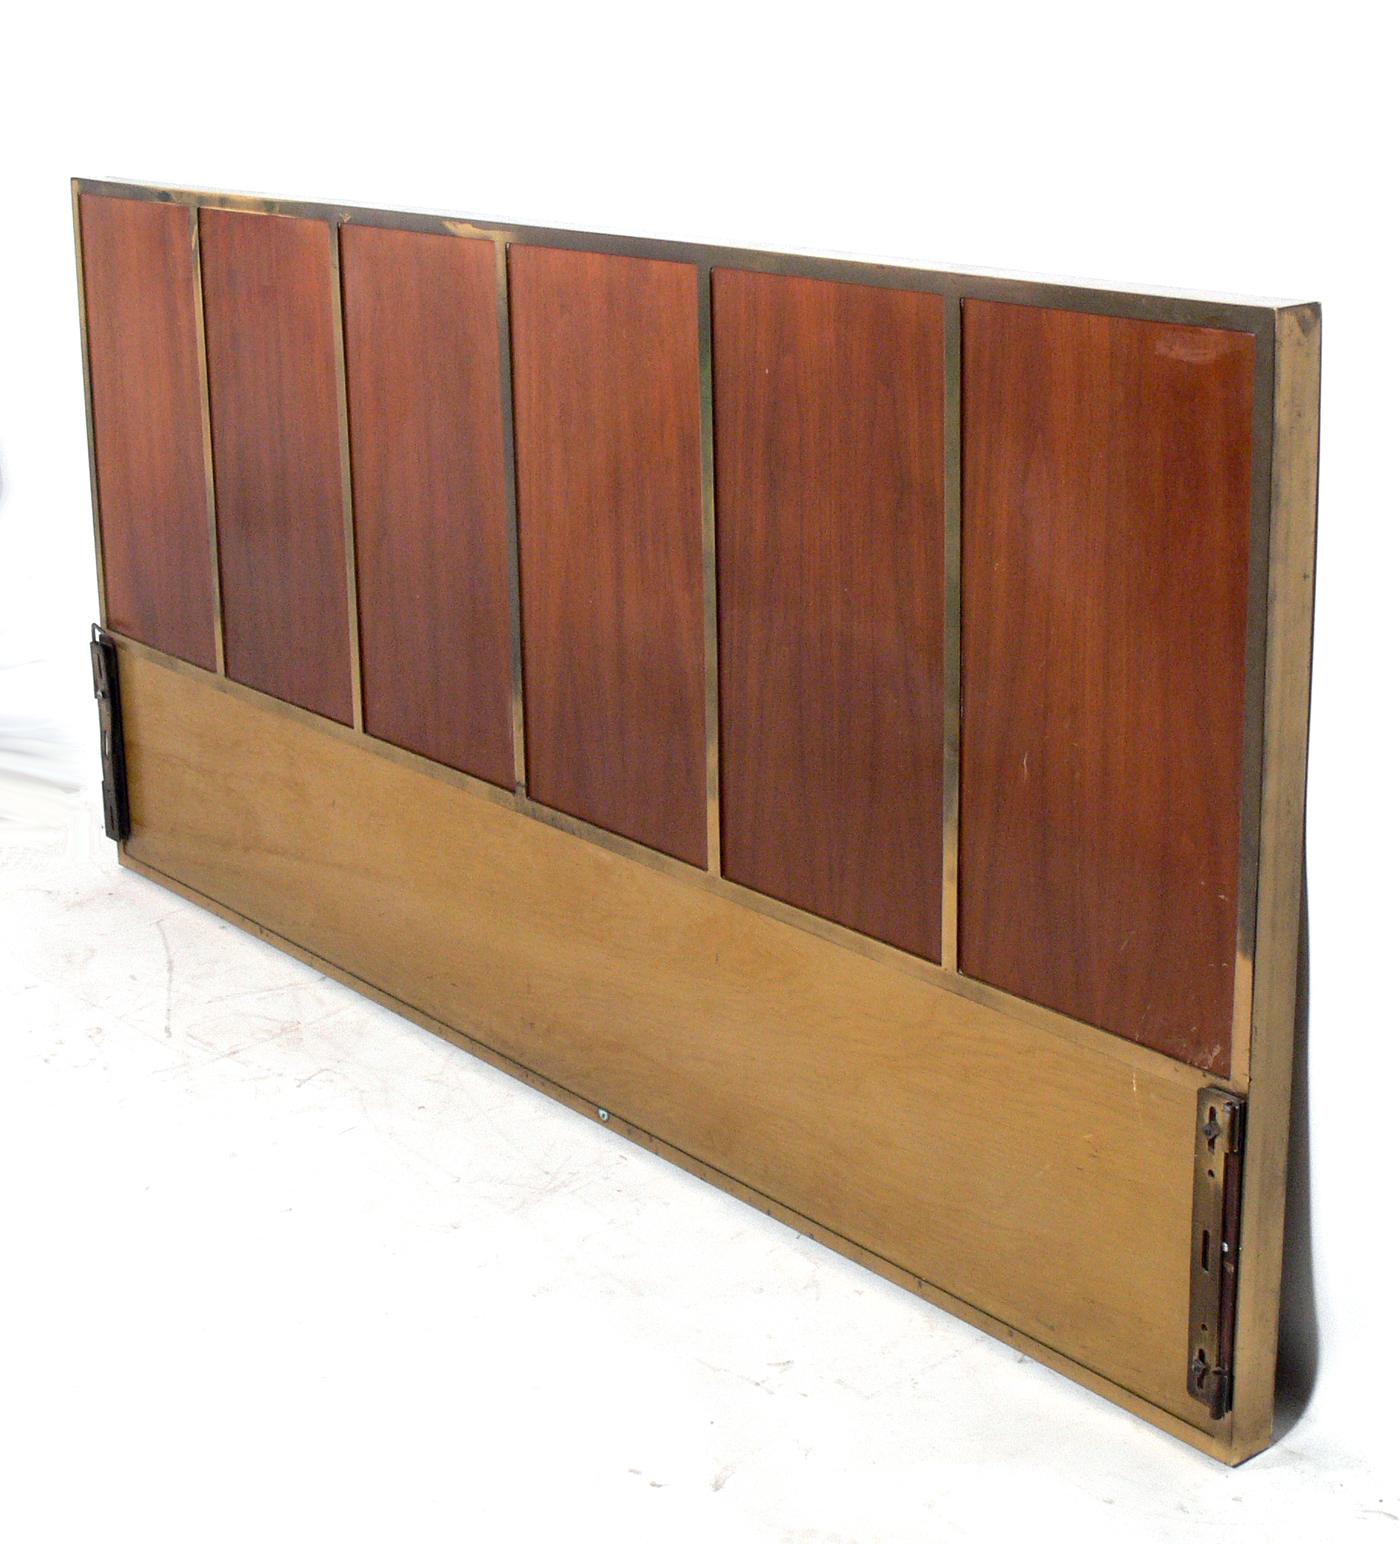 Clean Lined Brass Framed King Size Headboard or Bed, designed by Paul McCobb for Calvin, American, circa 1950s. This piece is currently being refinished and can be completed in your choice of color. The price noted includes refinishing. Brass